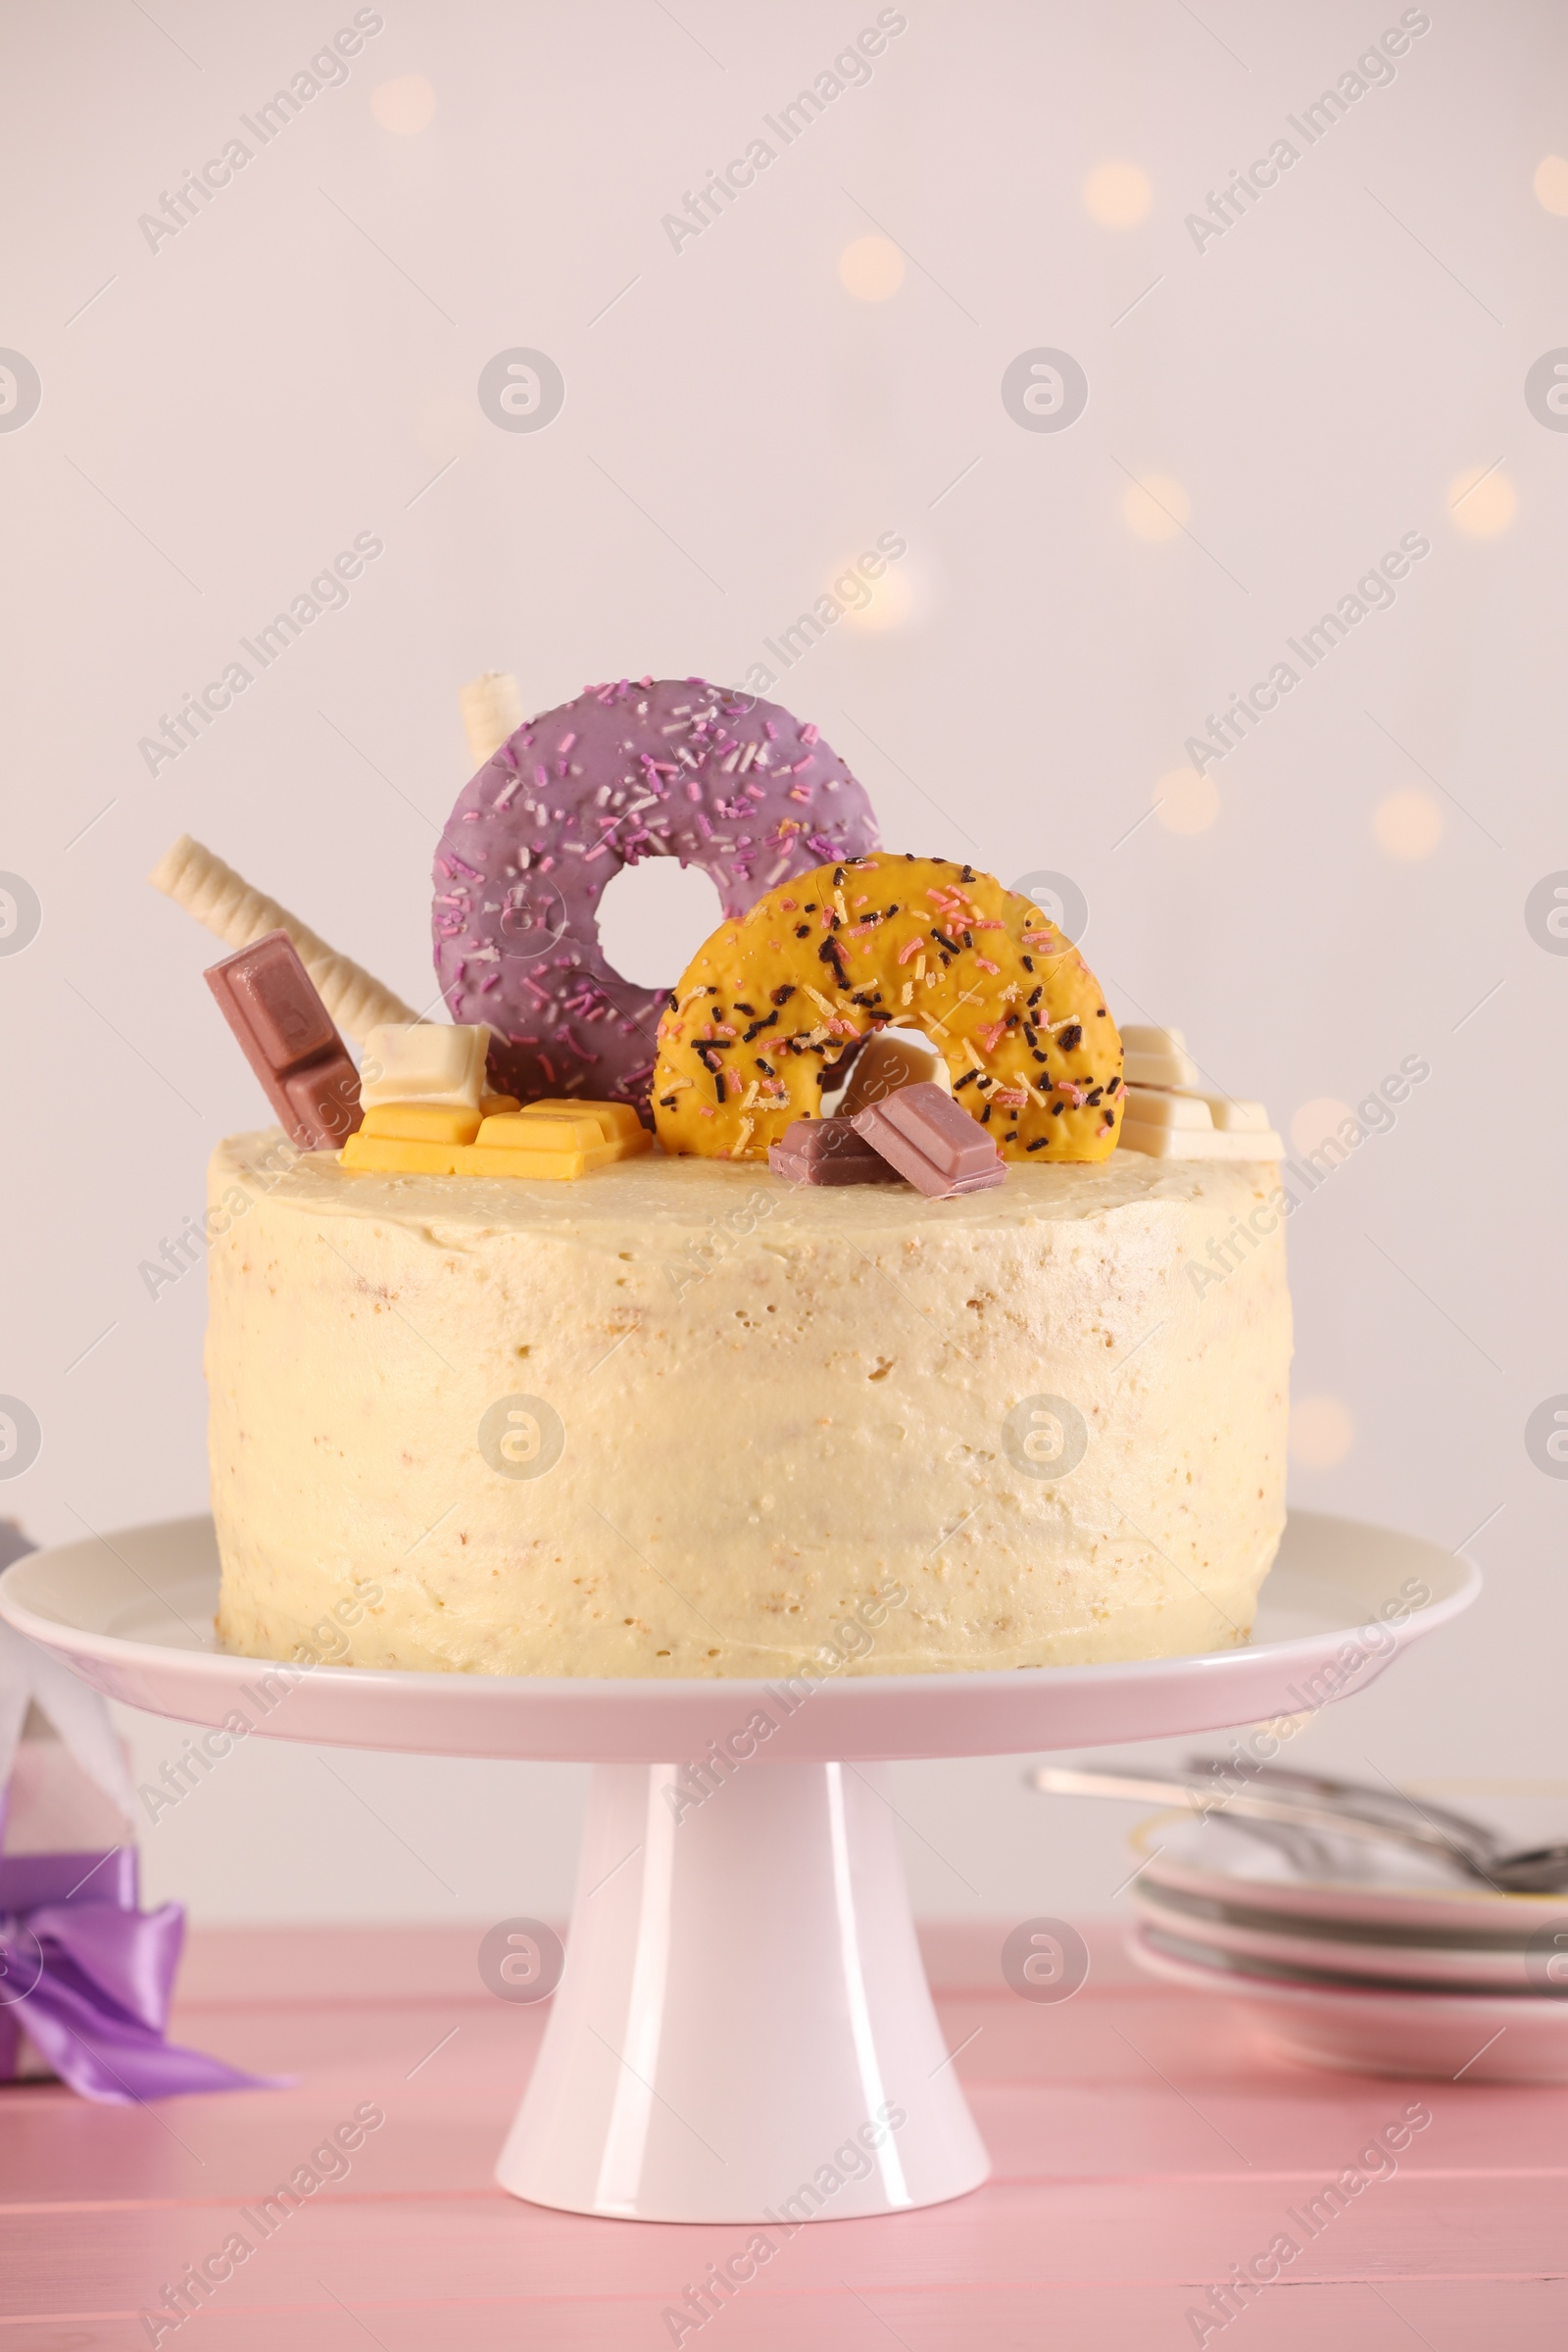 Photo of Delicious cake decorated with sweets on pink wooden table